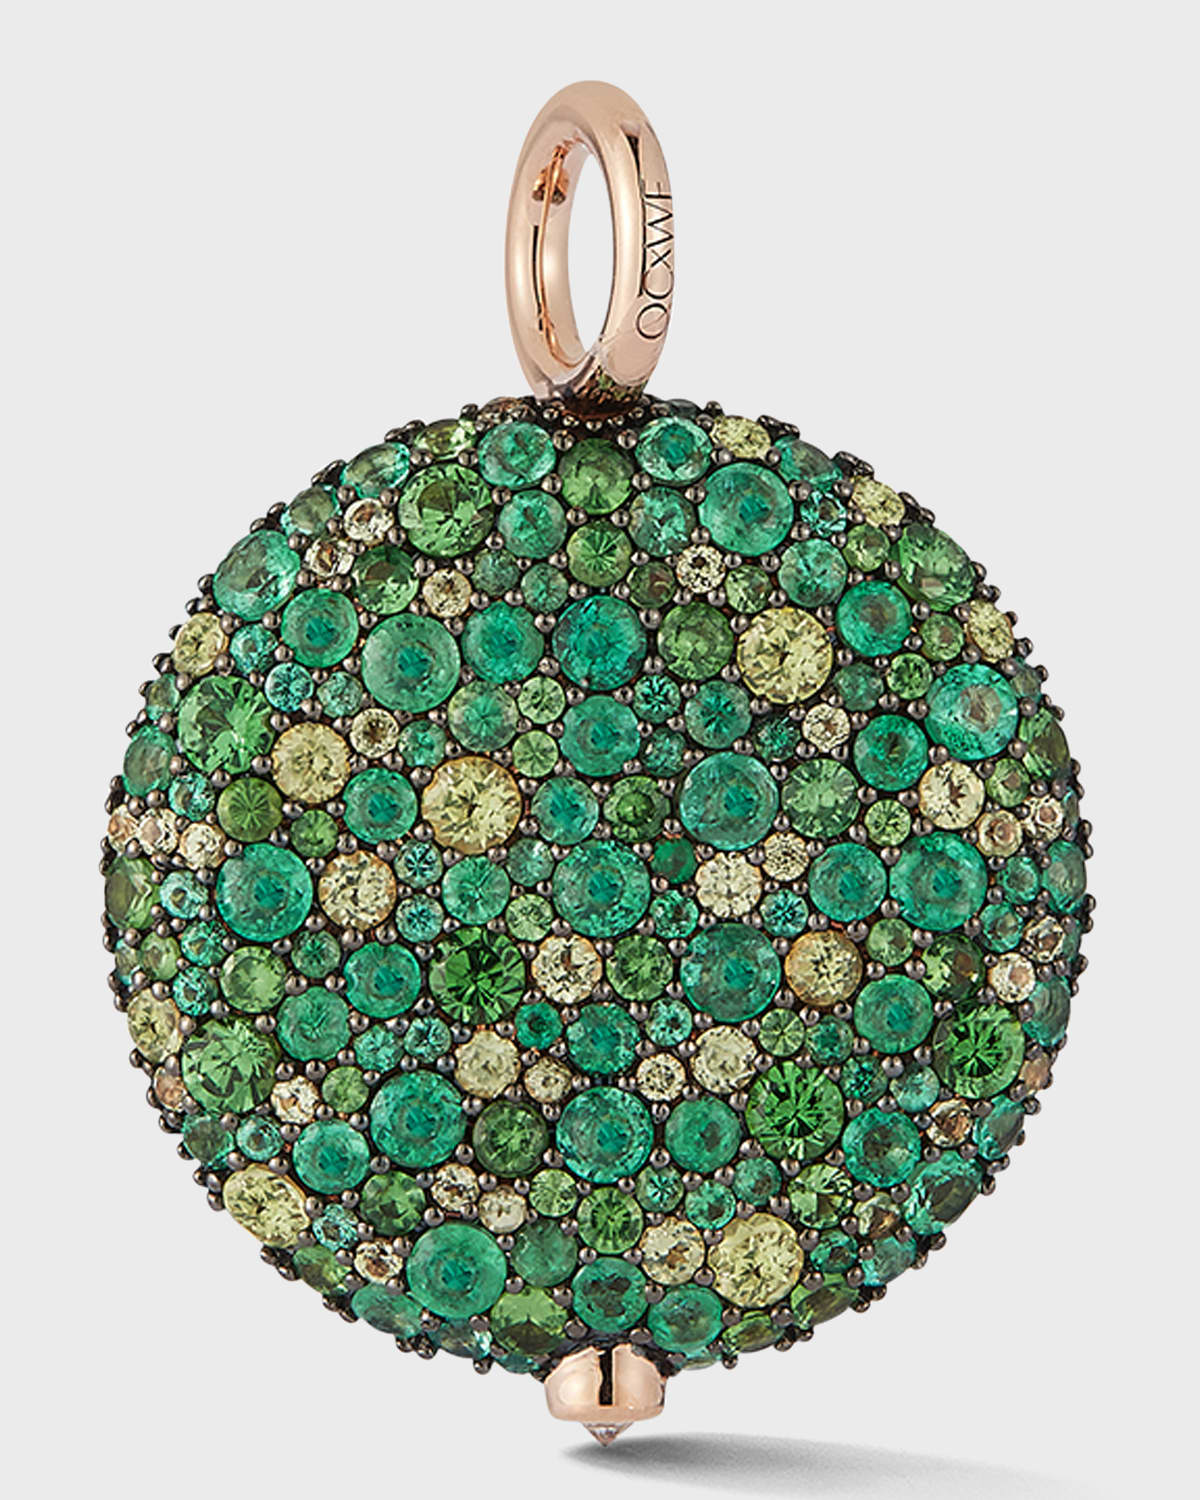 25mm Large Pebble Pendant in 18K Rose Gold and Green Emeralds